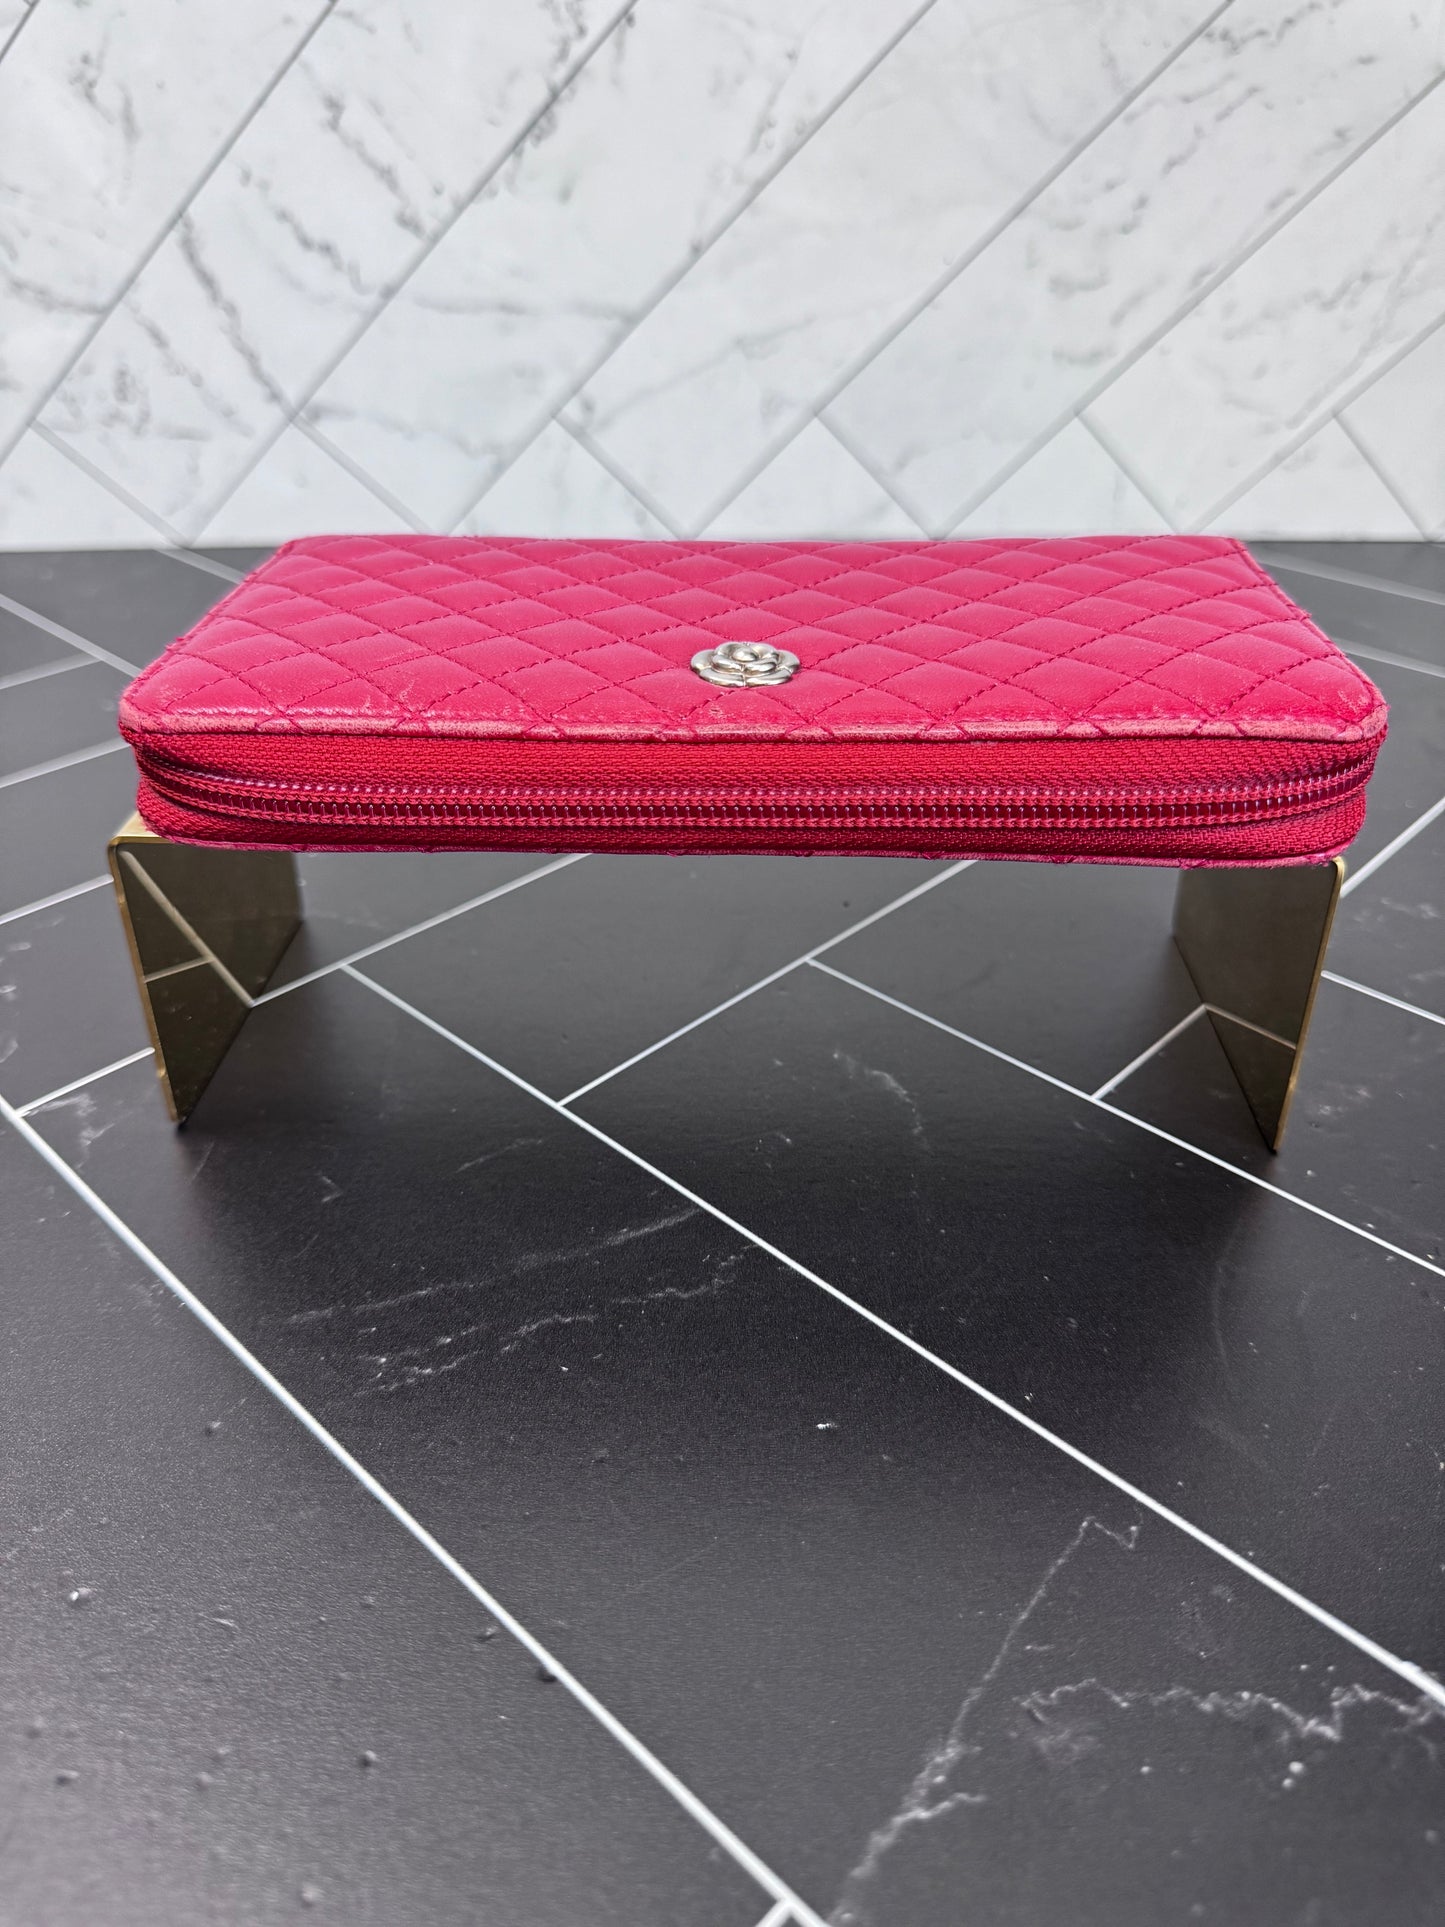 Chanel Red Lambskin Quilted Zippy Wallet